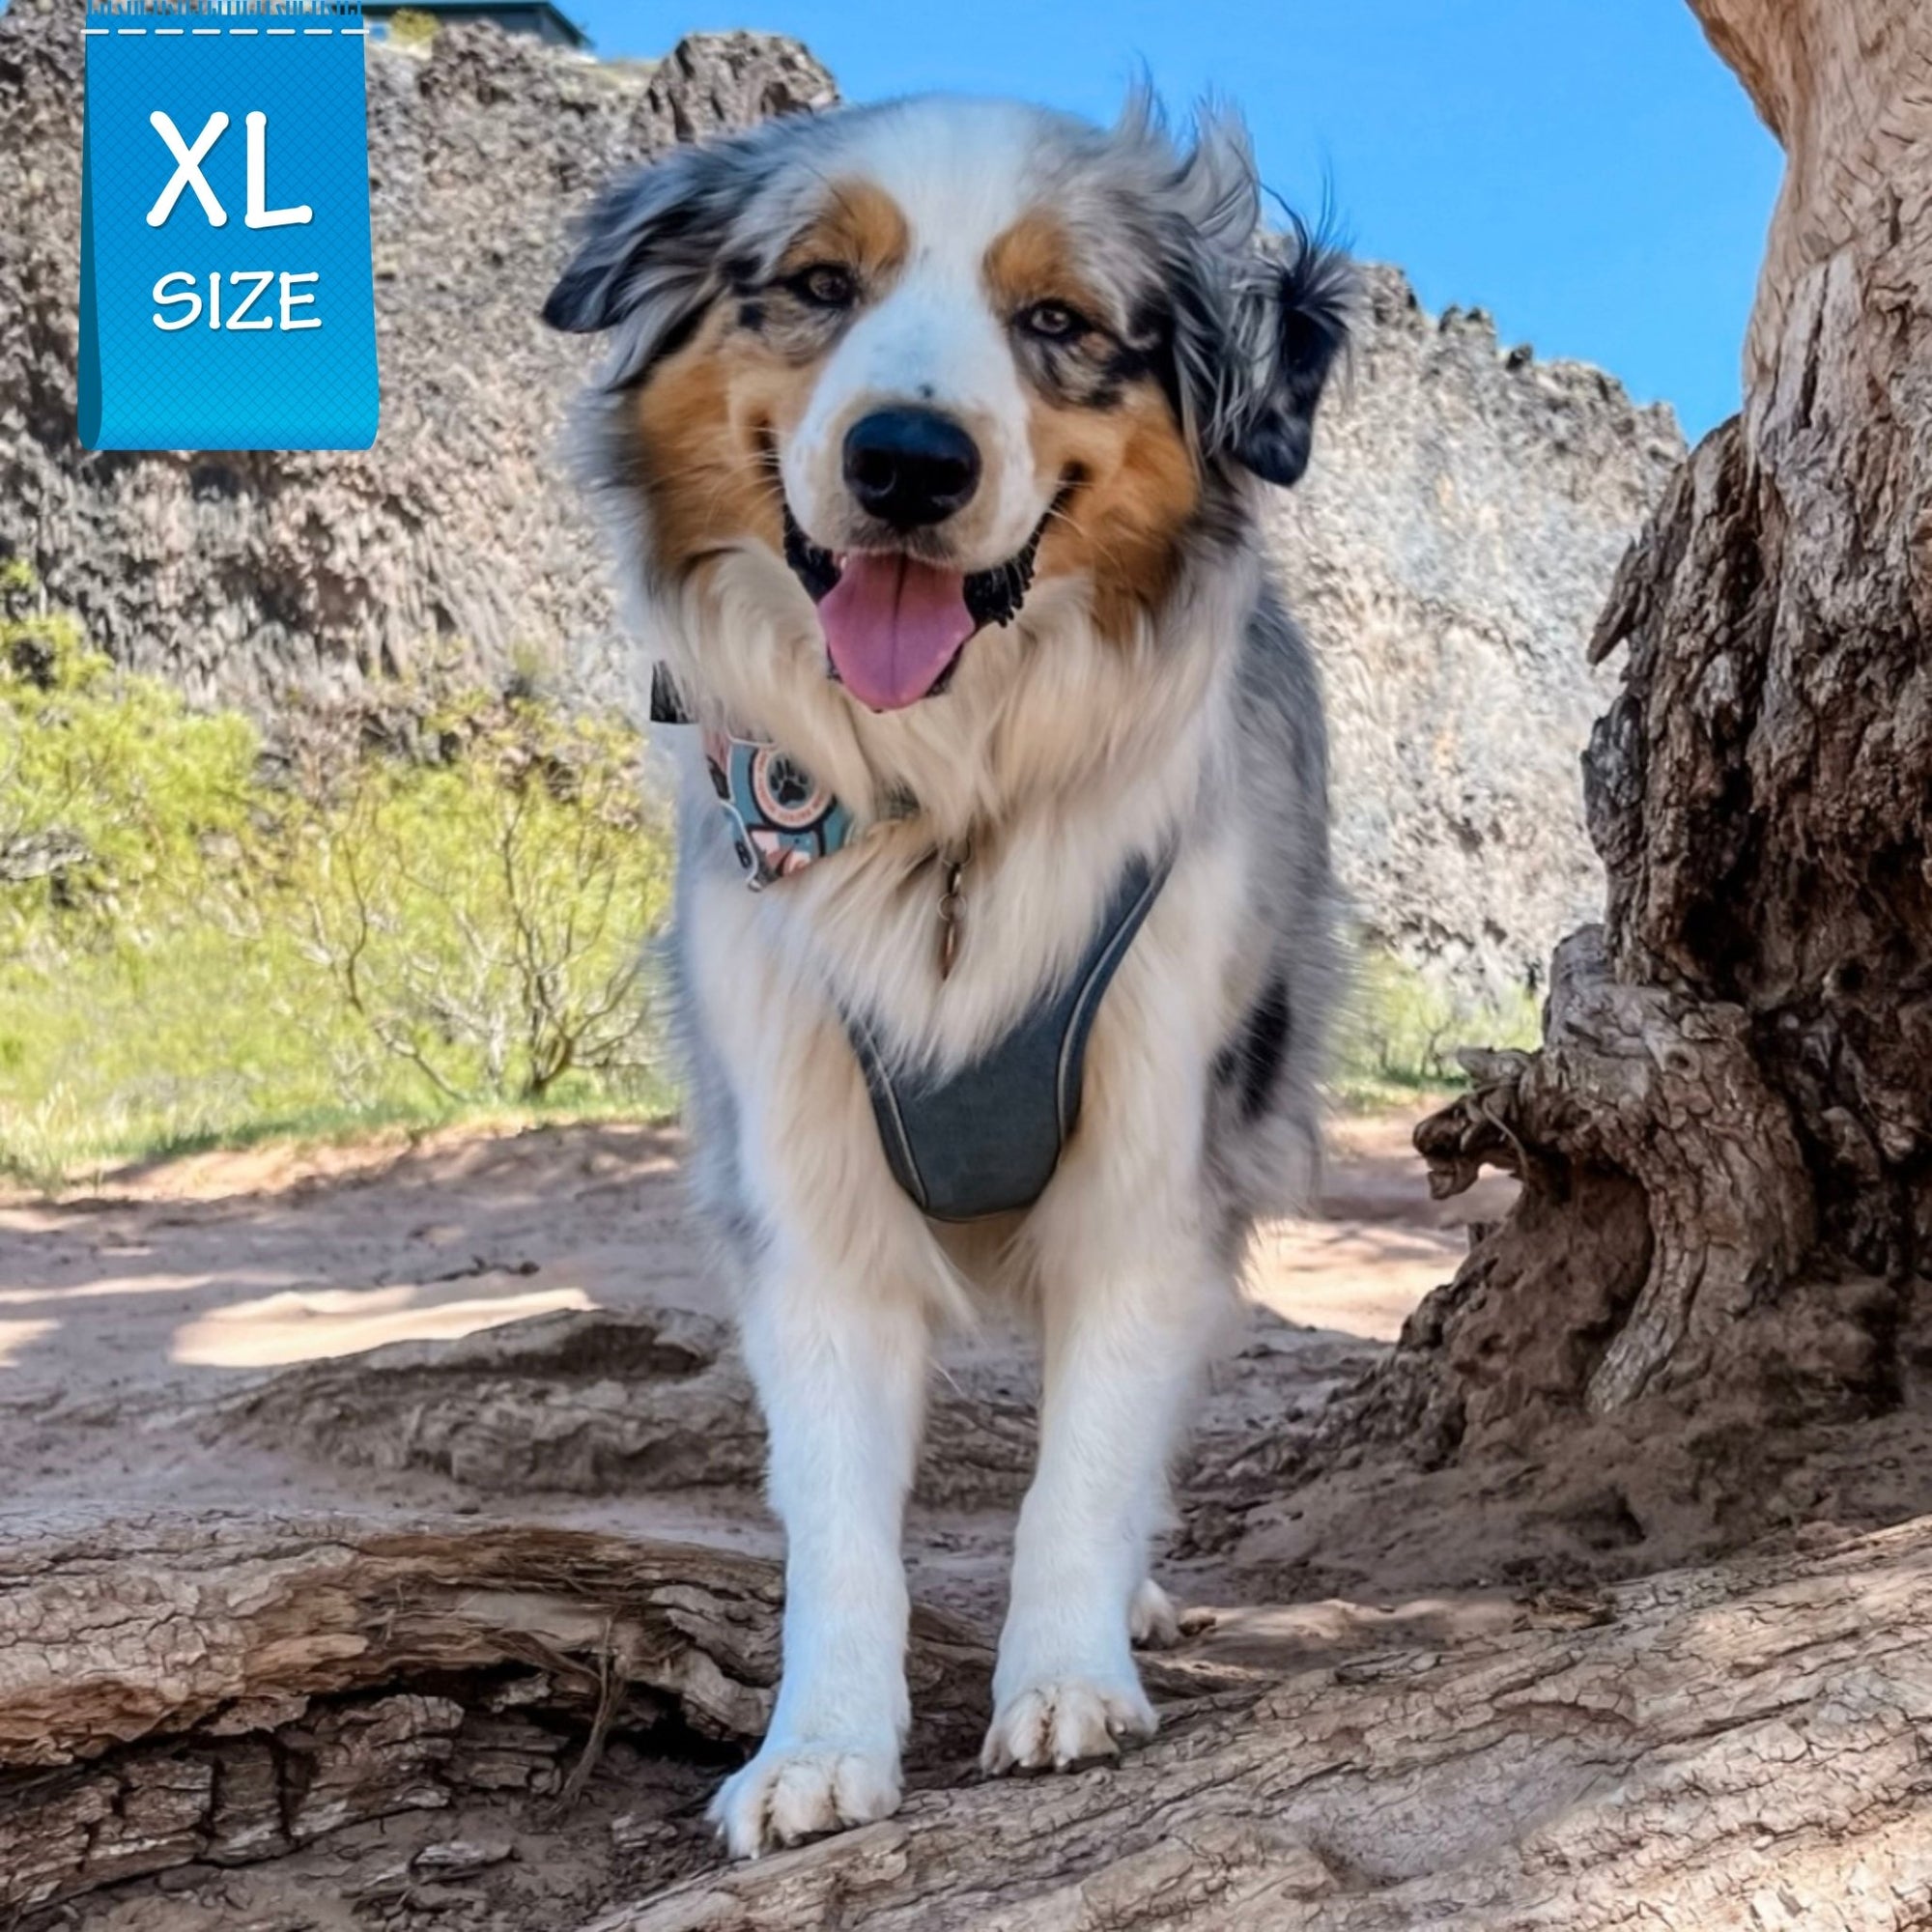 Dog Harness and Leash -Denim Reflective and No Pull - Australian Shepard wearing Downtown Denim Dog Harness with reflective accents - standing on a rock with cliffs in the background - Wag Trendz